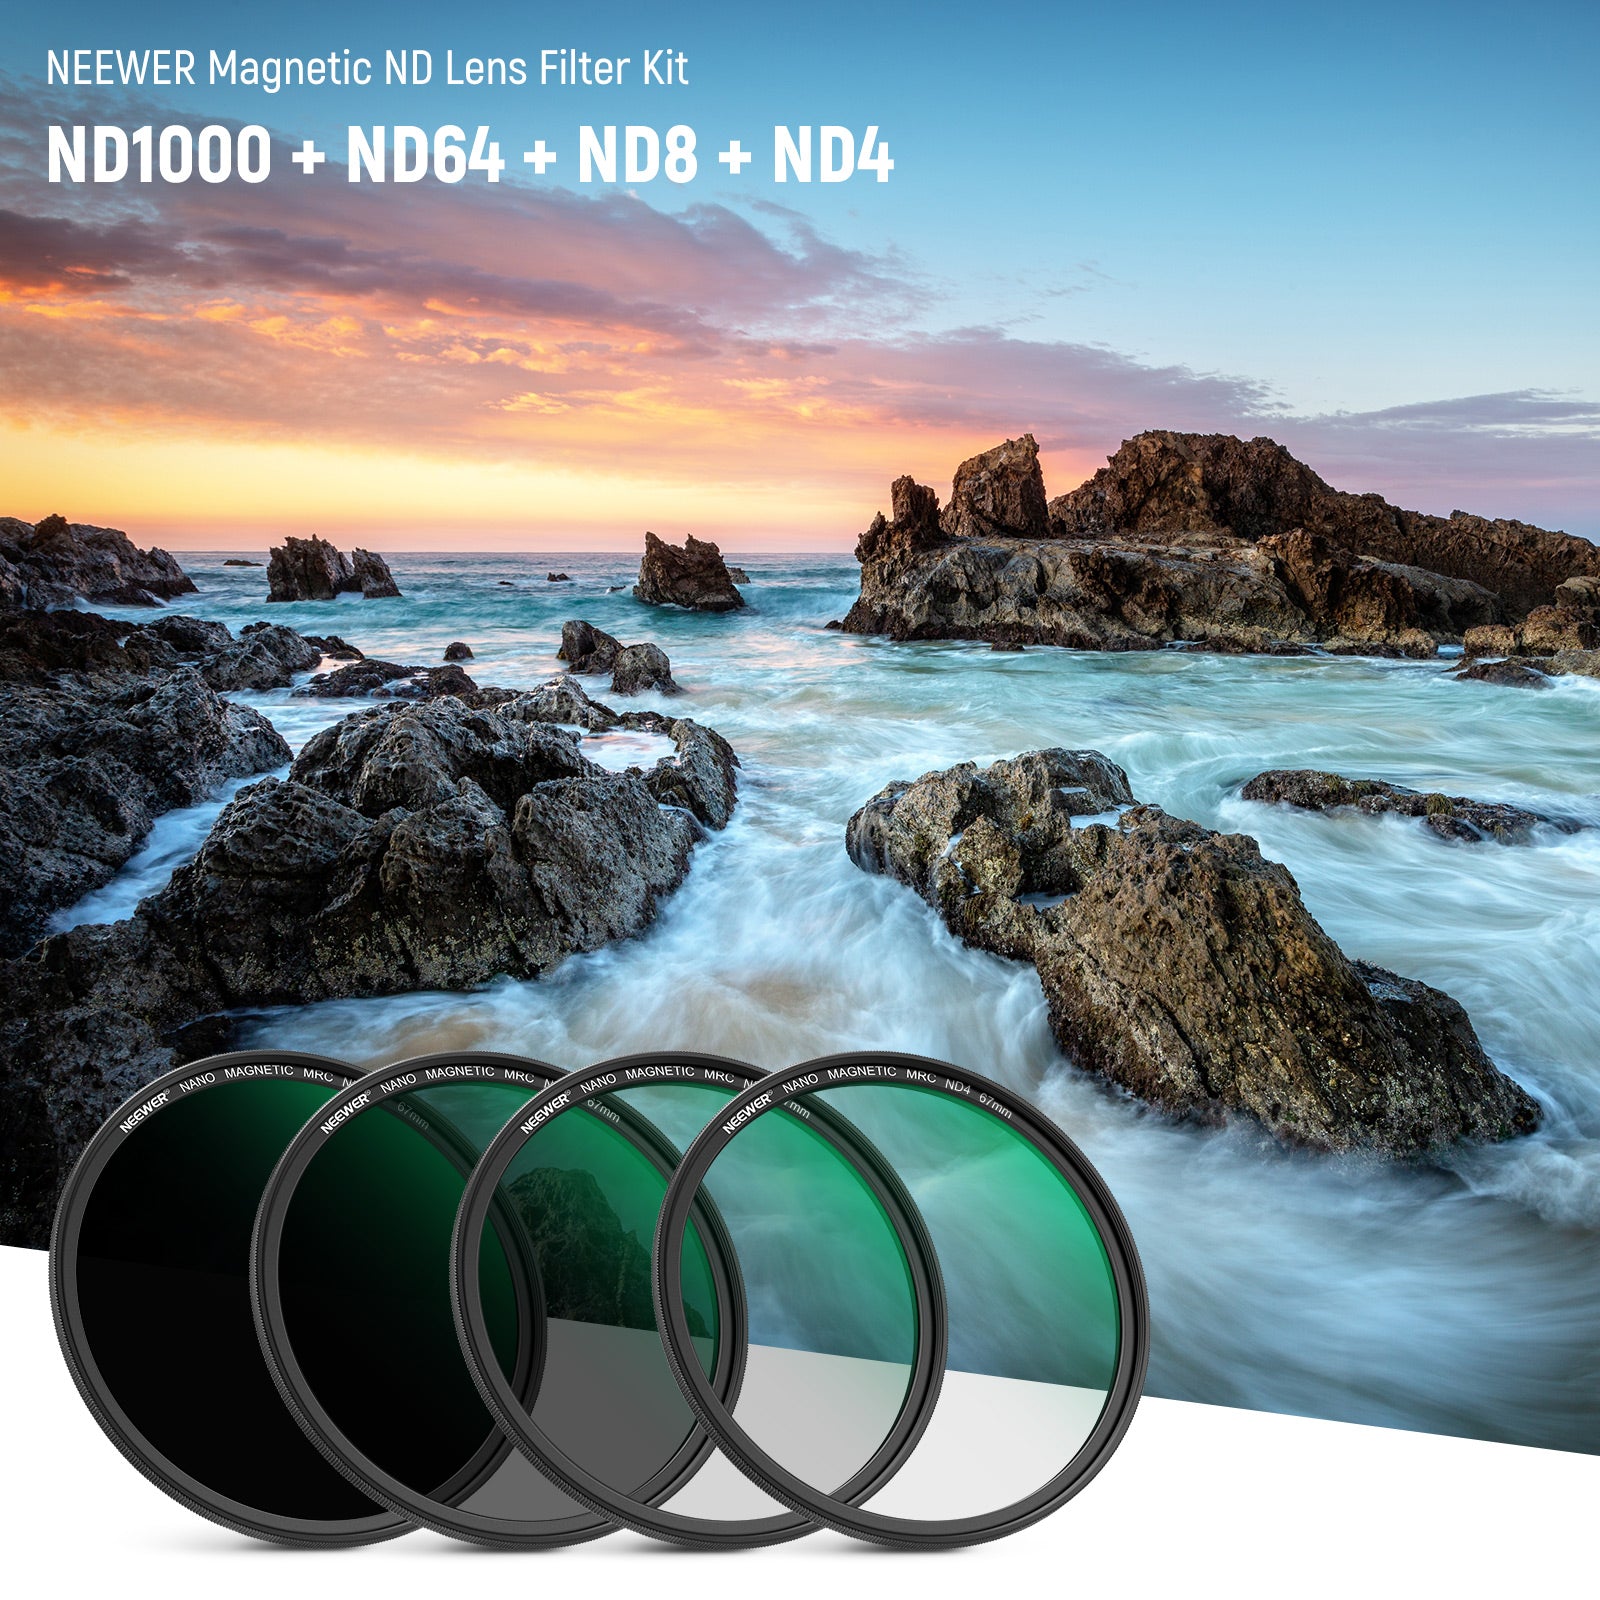 NEEWER 67mm Magnetic ND Lens Filter Kit（ND4 ND8 ND64 ND1000 